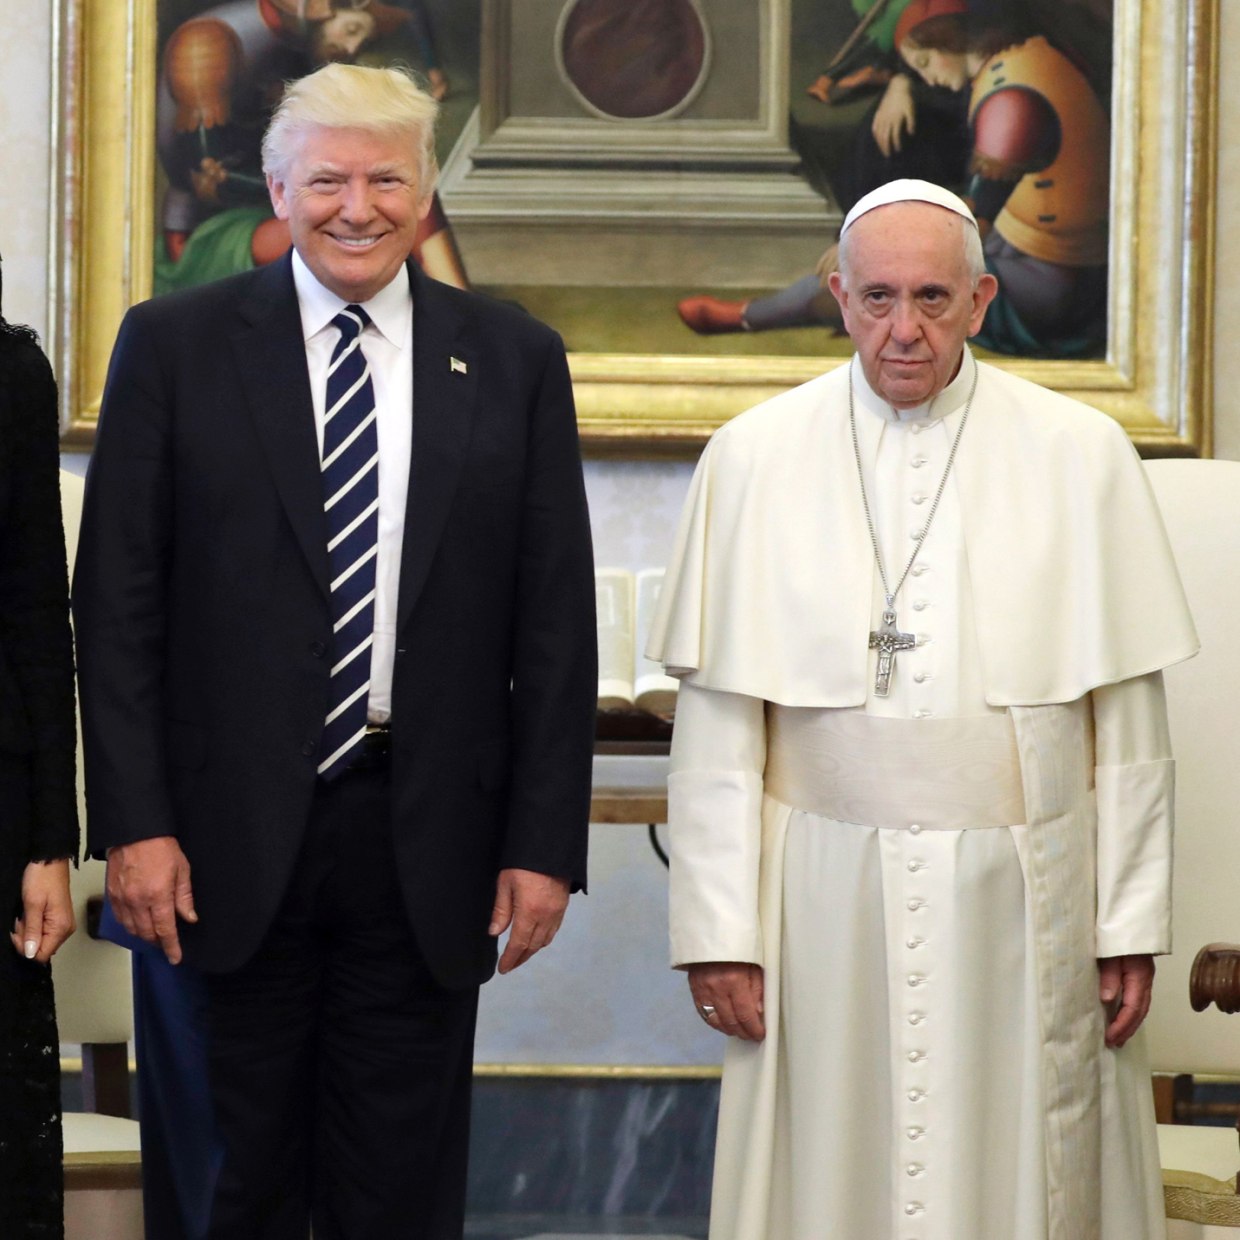 Trump to Pope Francis After Vatican Meeting: I 'Won't Forget What You Said'